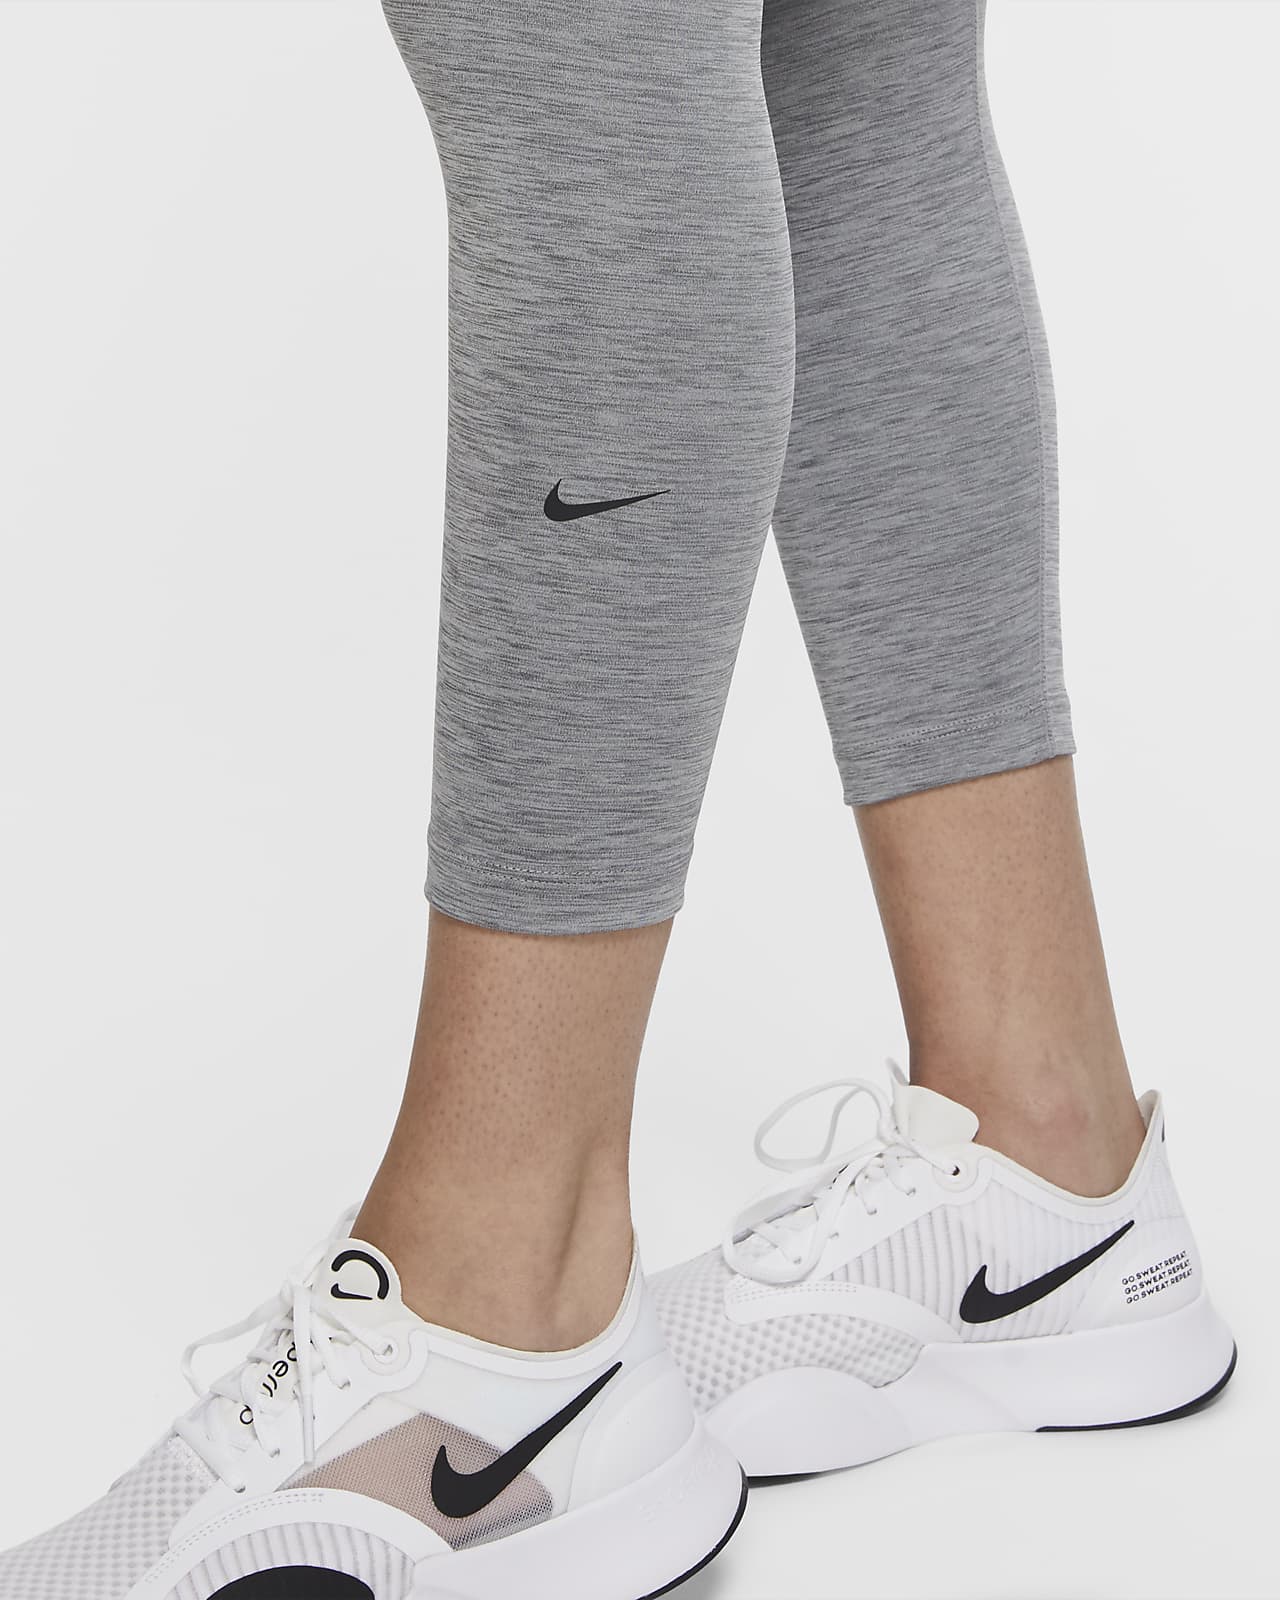 mid rise nike shoes